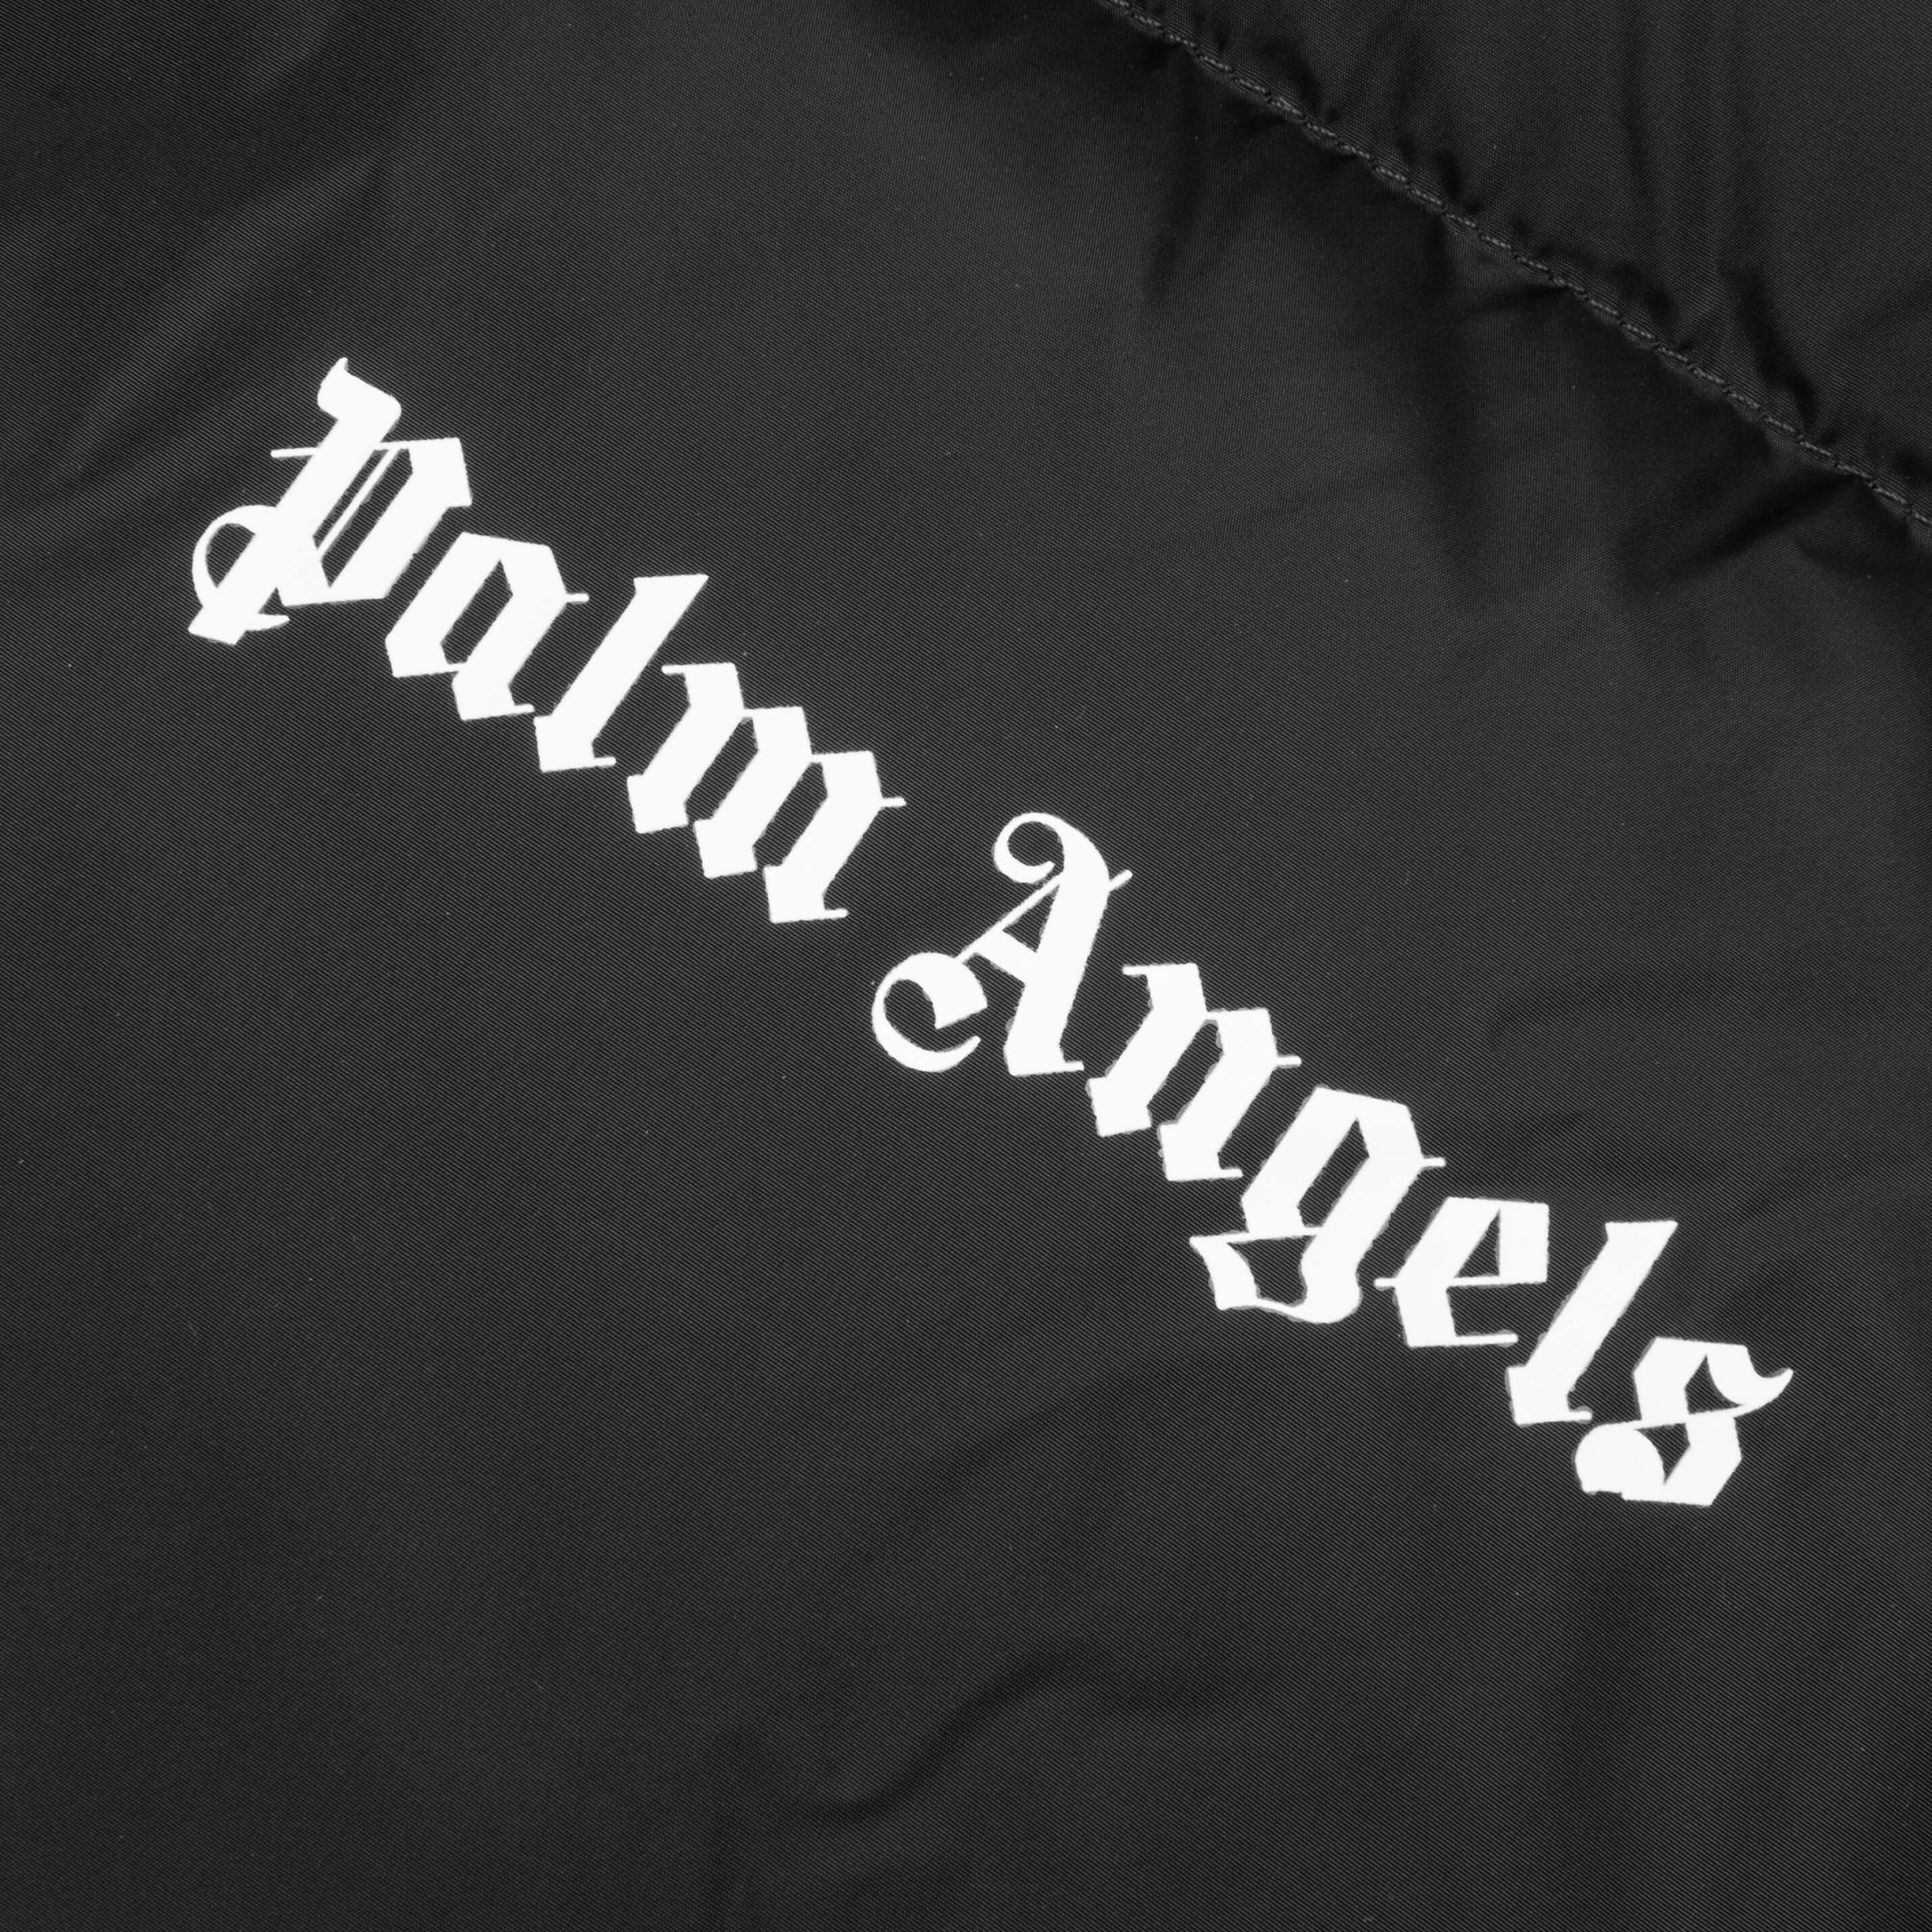 CLASSIC TRACK DOWN JACKET in black - Palm Angels® Official